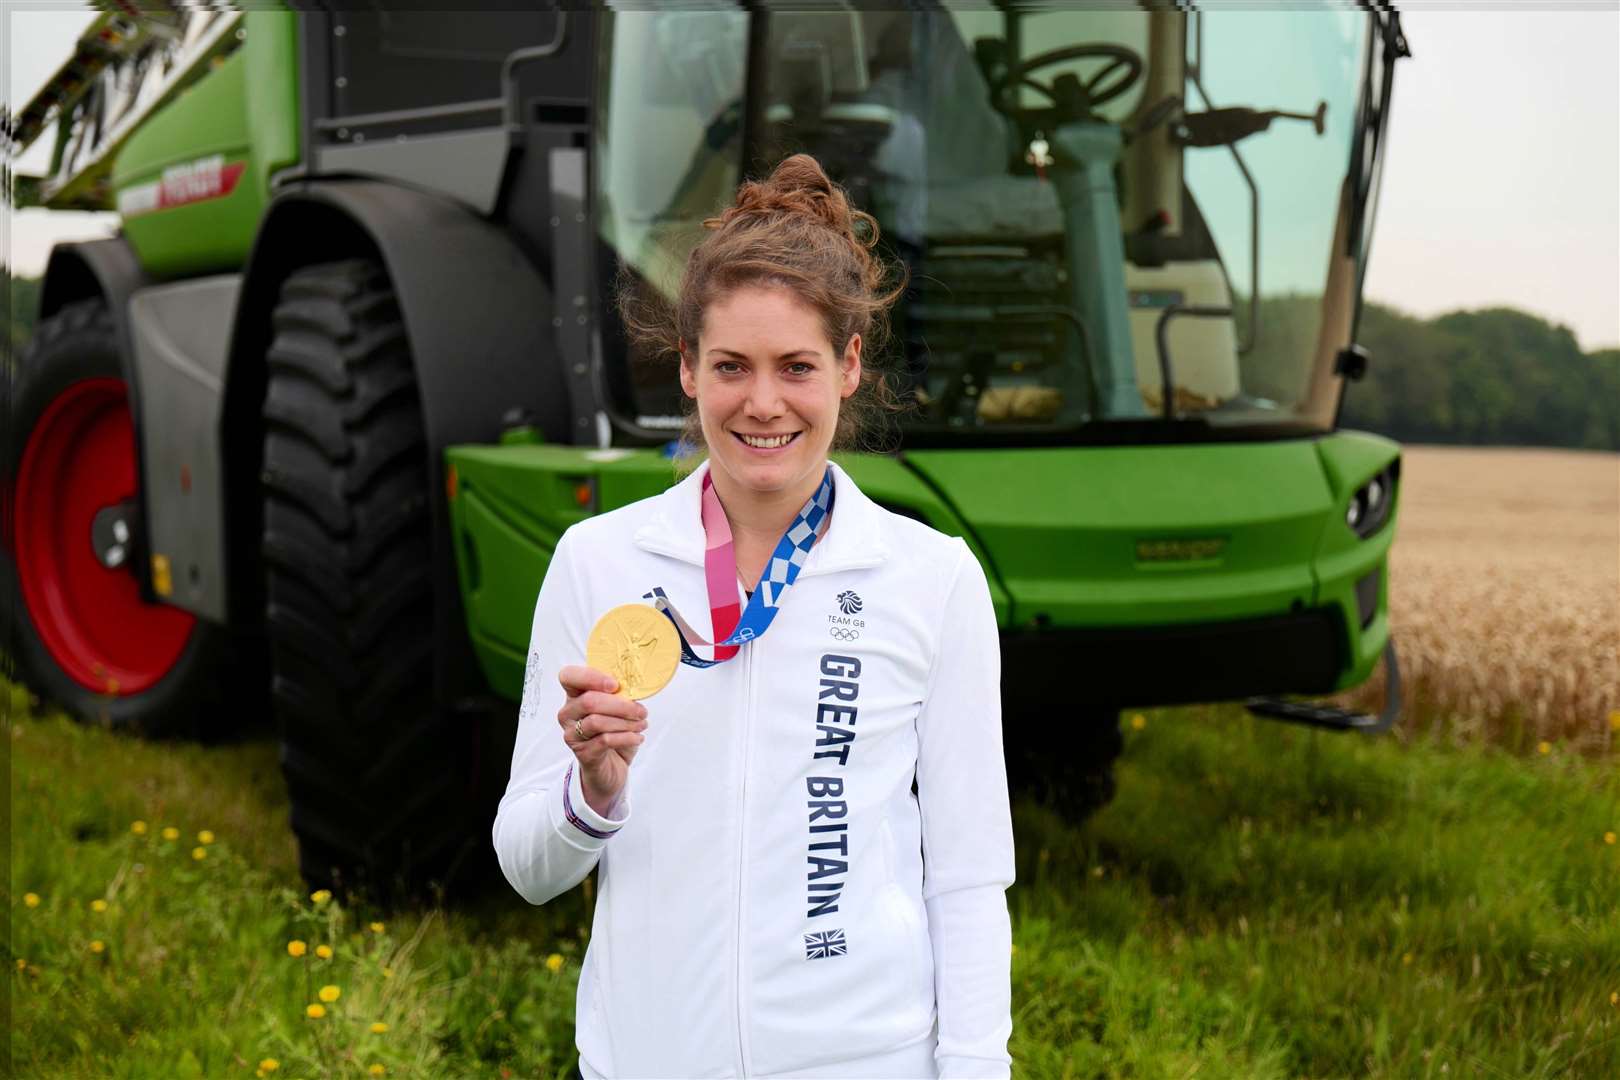 Kate French, from Meopham poses with her gold medal next to the crop sprayer named 'Tokyo' after her triumph in the 2020 Olympic Games.